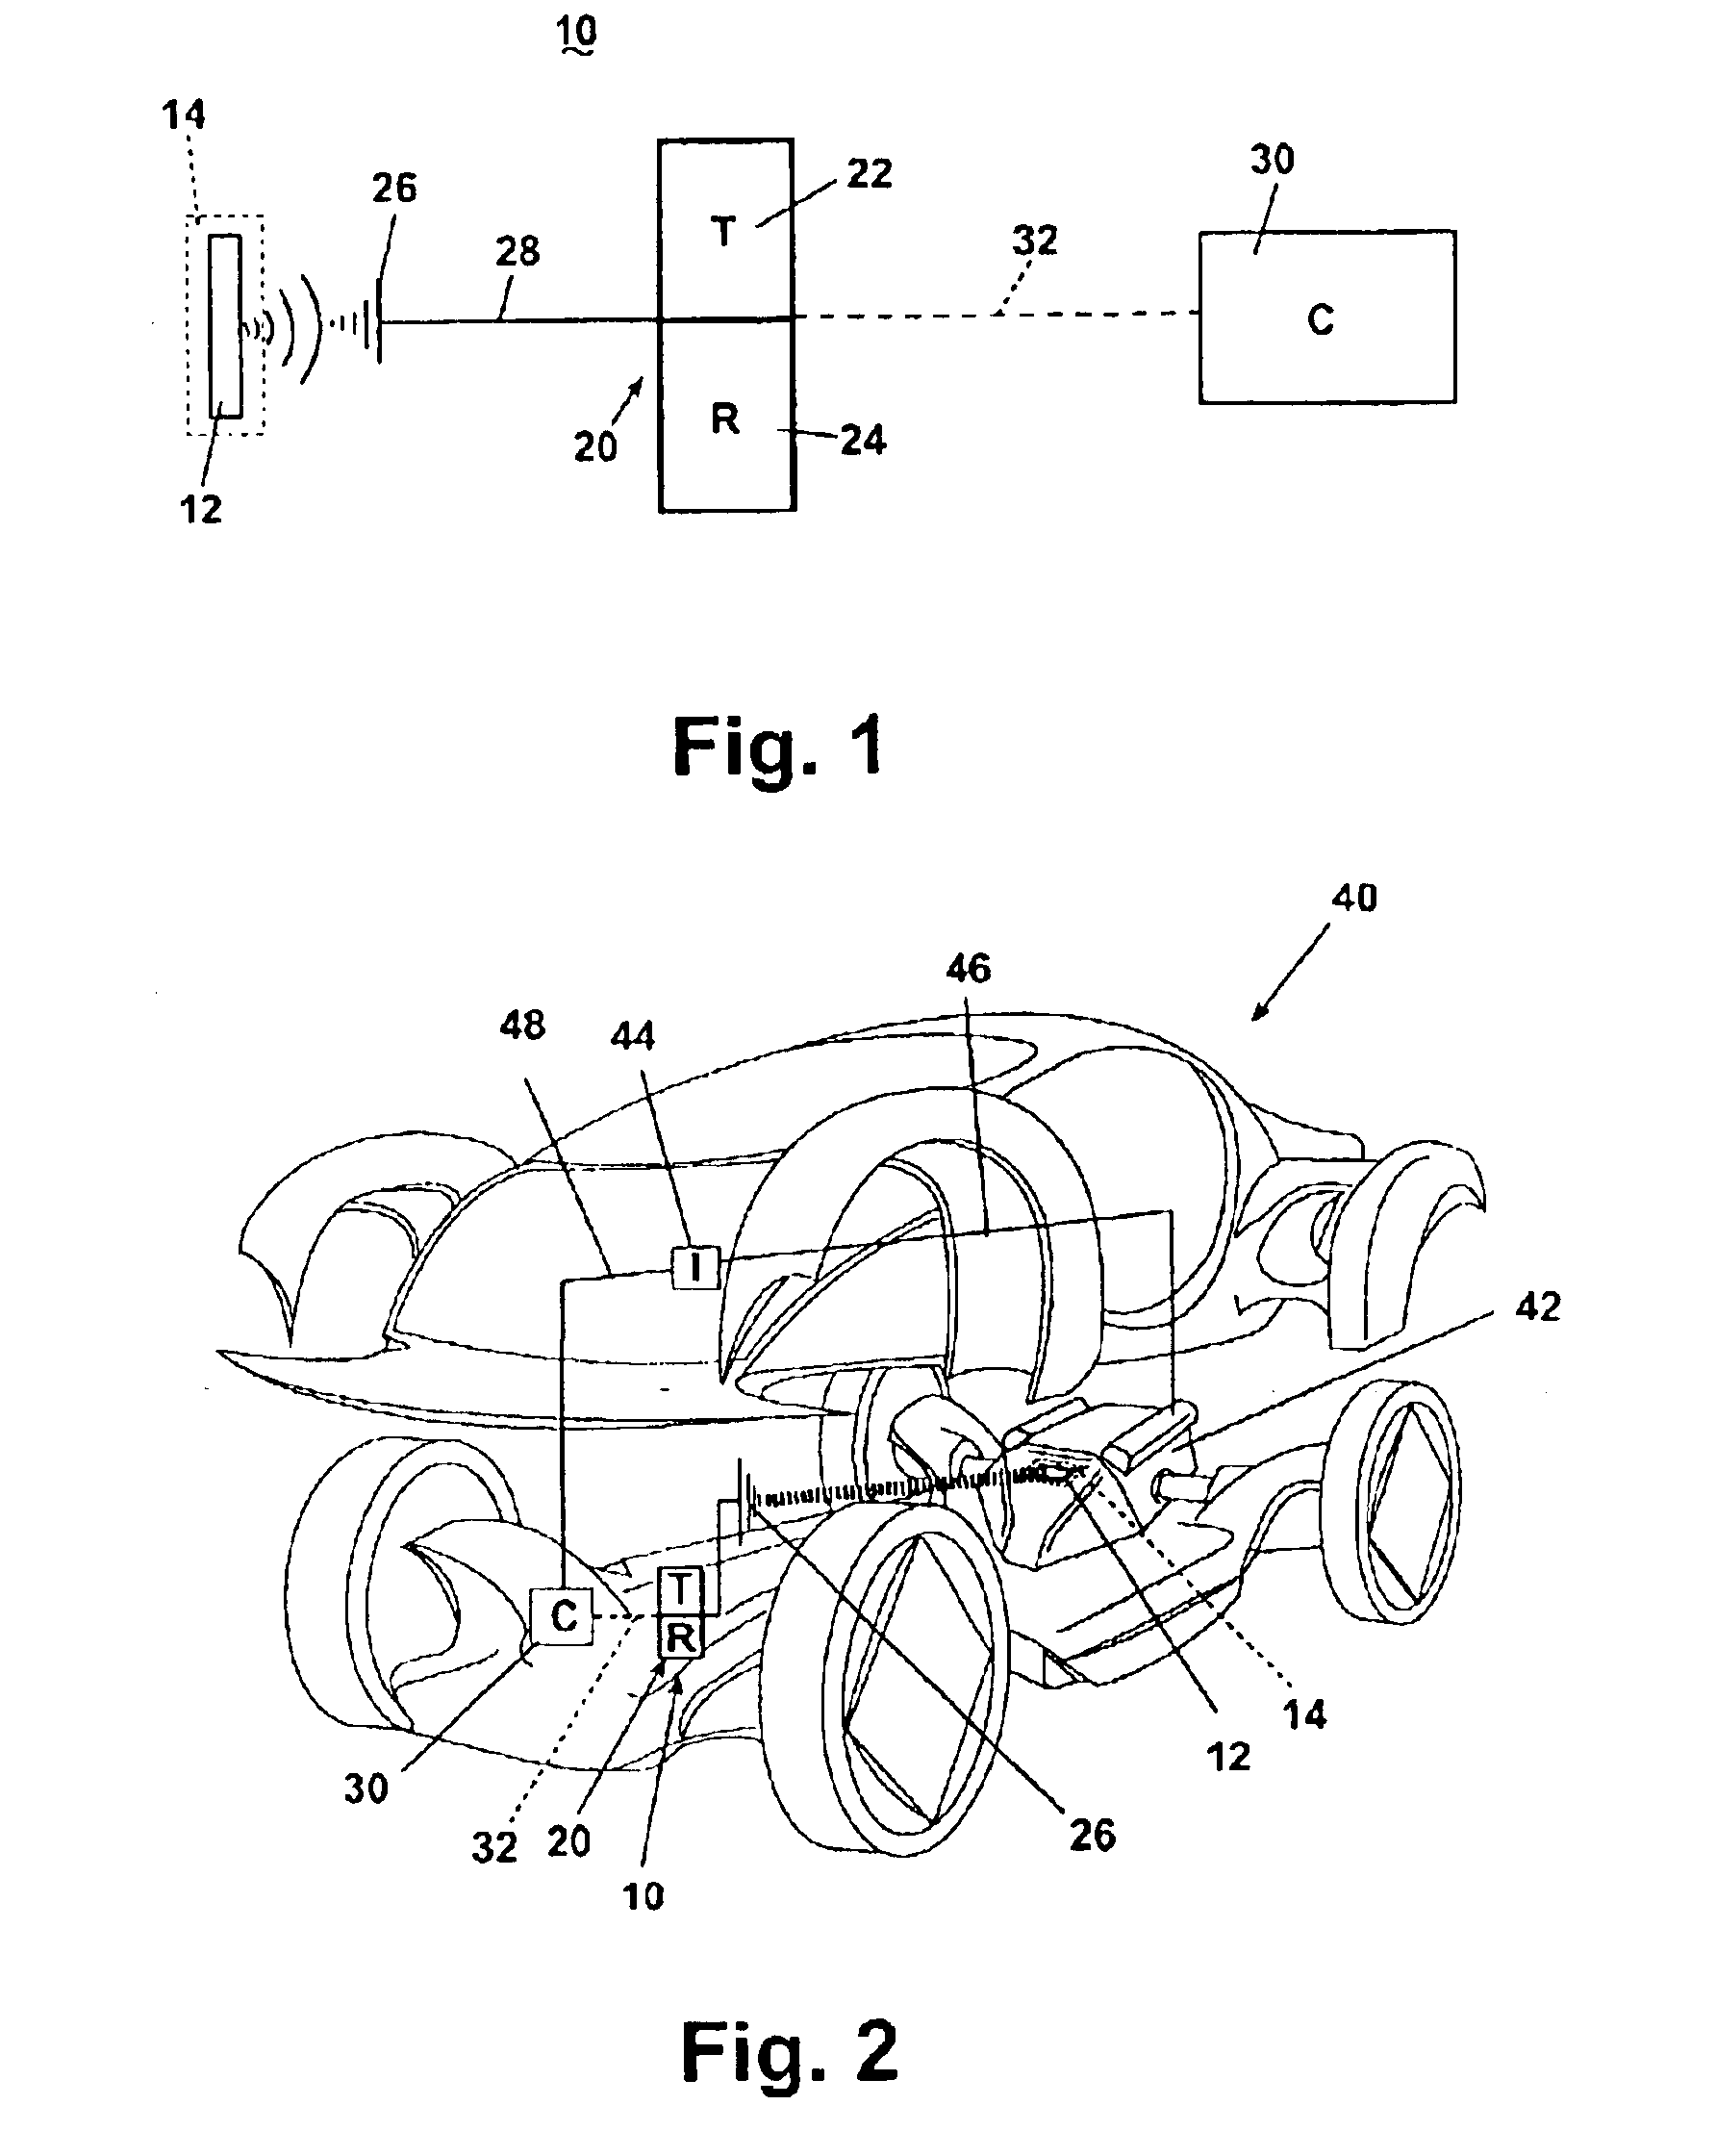 Vehicle control system with radio frequency identification tag